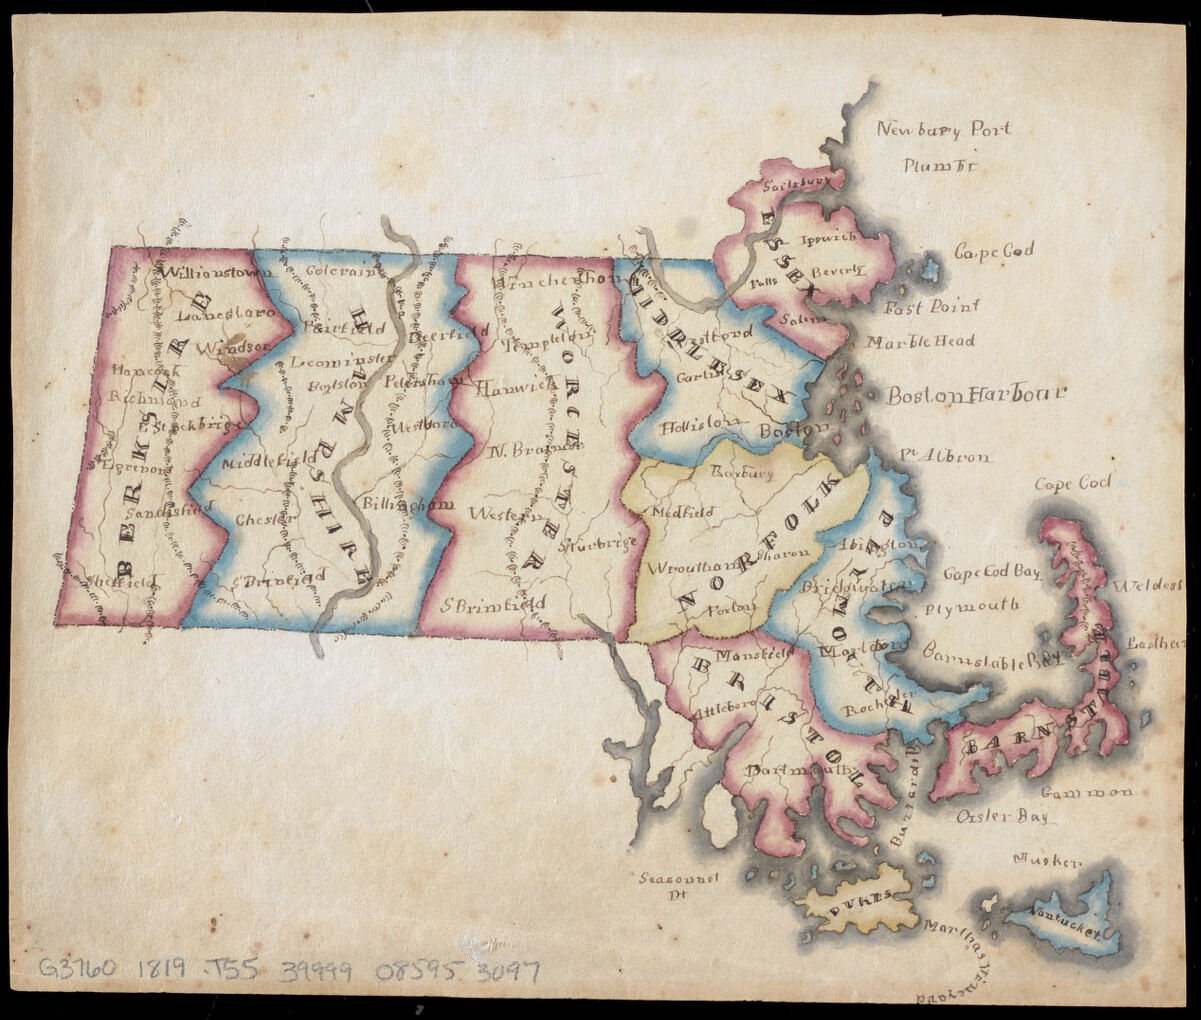 *[Map of Massachusetts](https://collections.leventhalmap.org/search/commonwealth:mw22xn331)* by Eliza Tileston, 1819